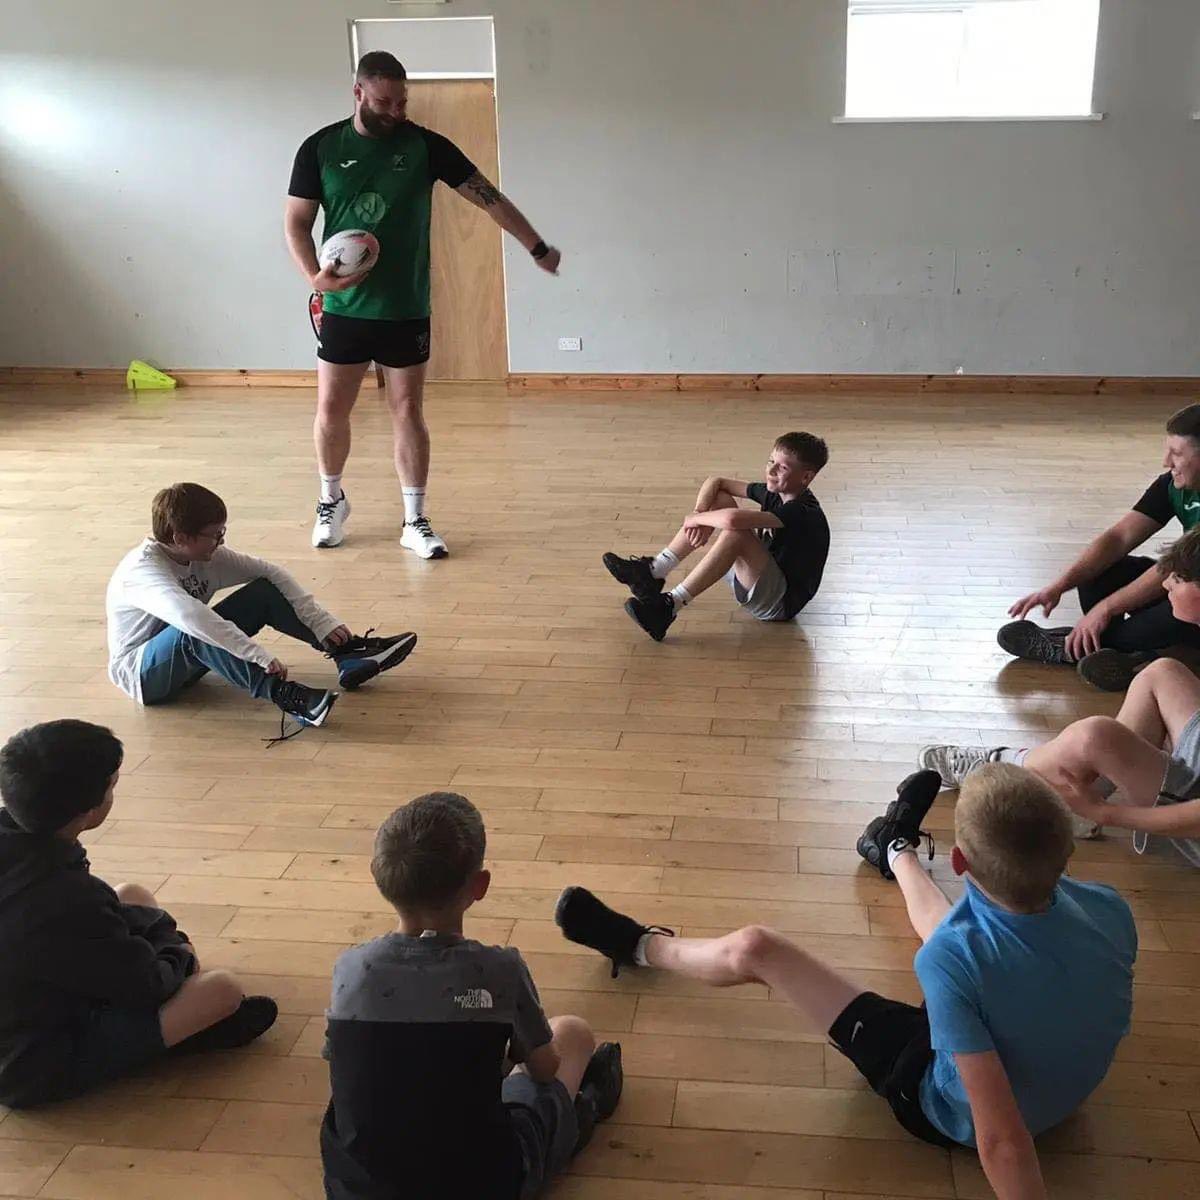 Last week, 1st XV players, Jordan and Andrew volunteered some time at the @holywood_yc to introduce rugby to a group of the younger members 🏉

Holywood Youth Centre is a great asset to our town. Follow their social media pages to keep up to date on what they are doing

❤️🖤💚